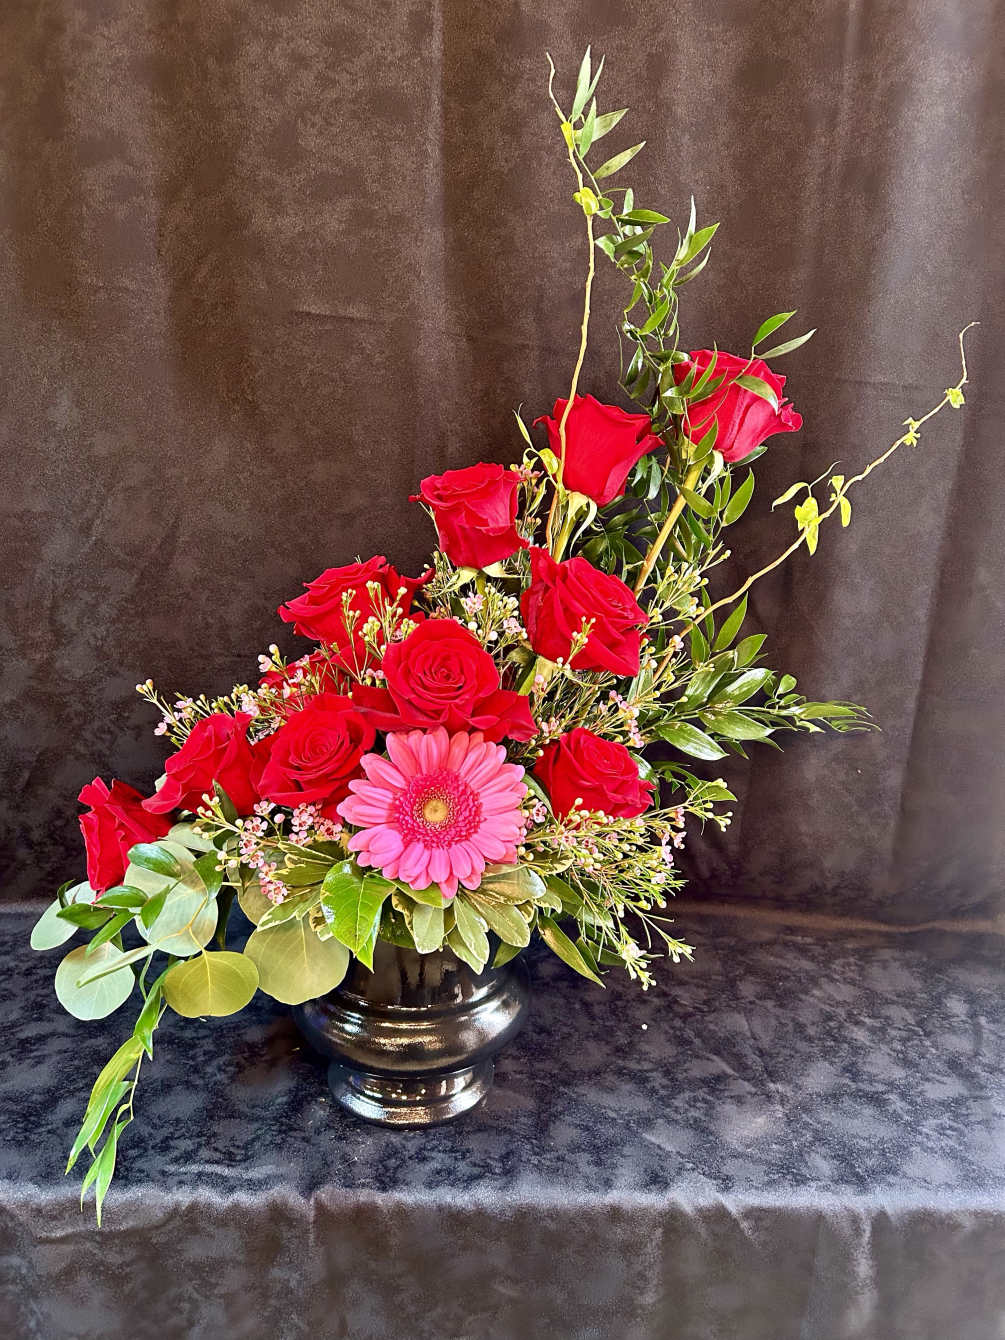 Red roses and pink gerberas designed in a container.